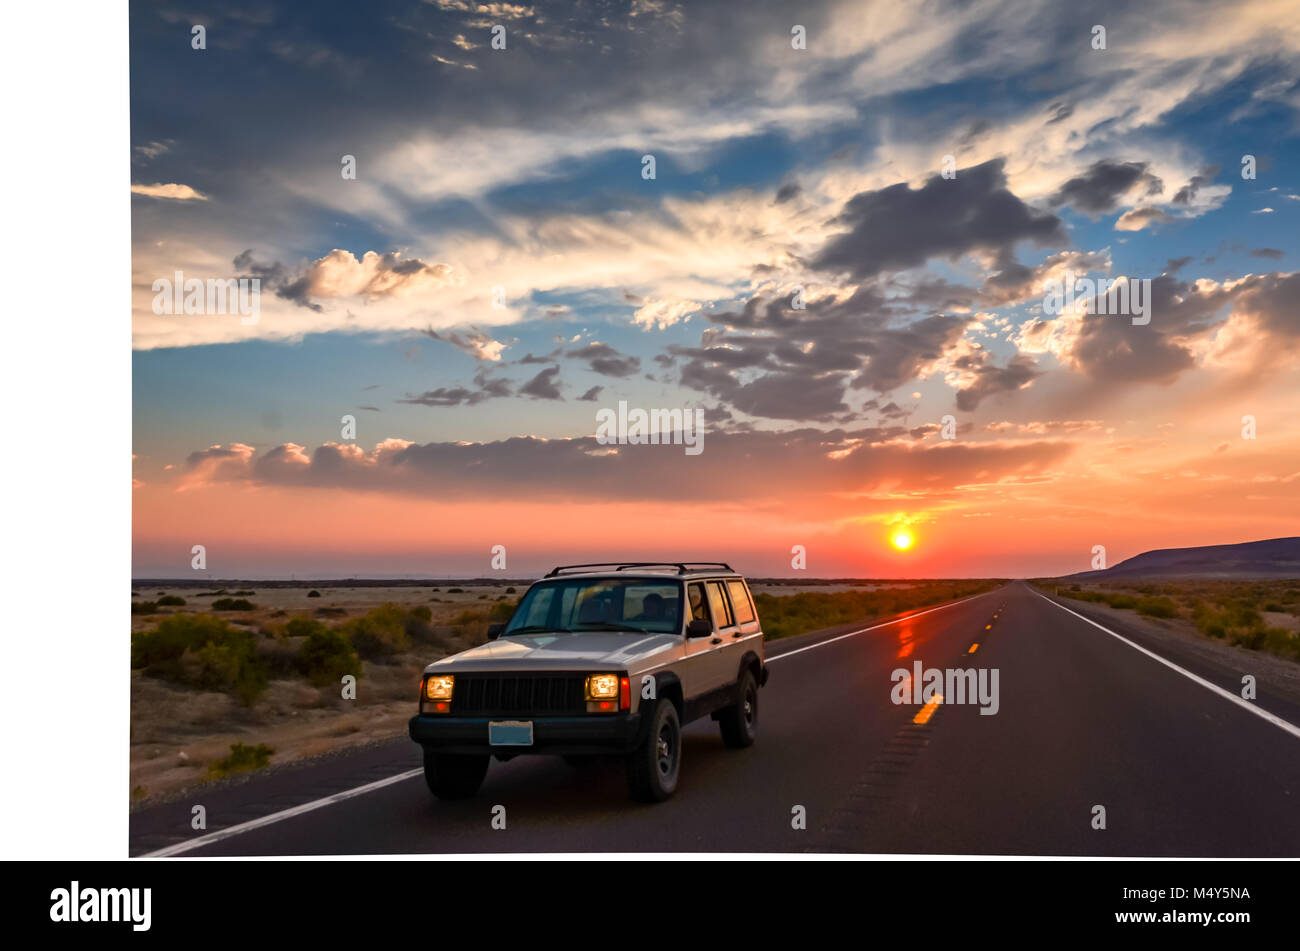 Sunset on Nevada highway, casting a glow on an SUV riding into the desert. Stock Photo